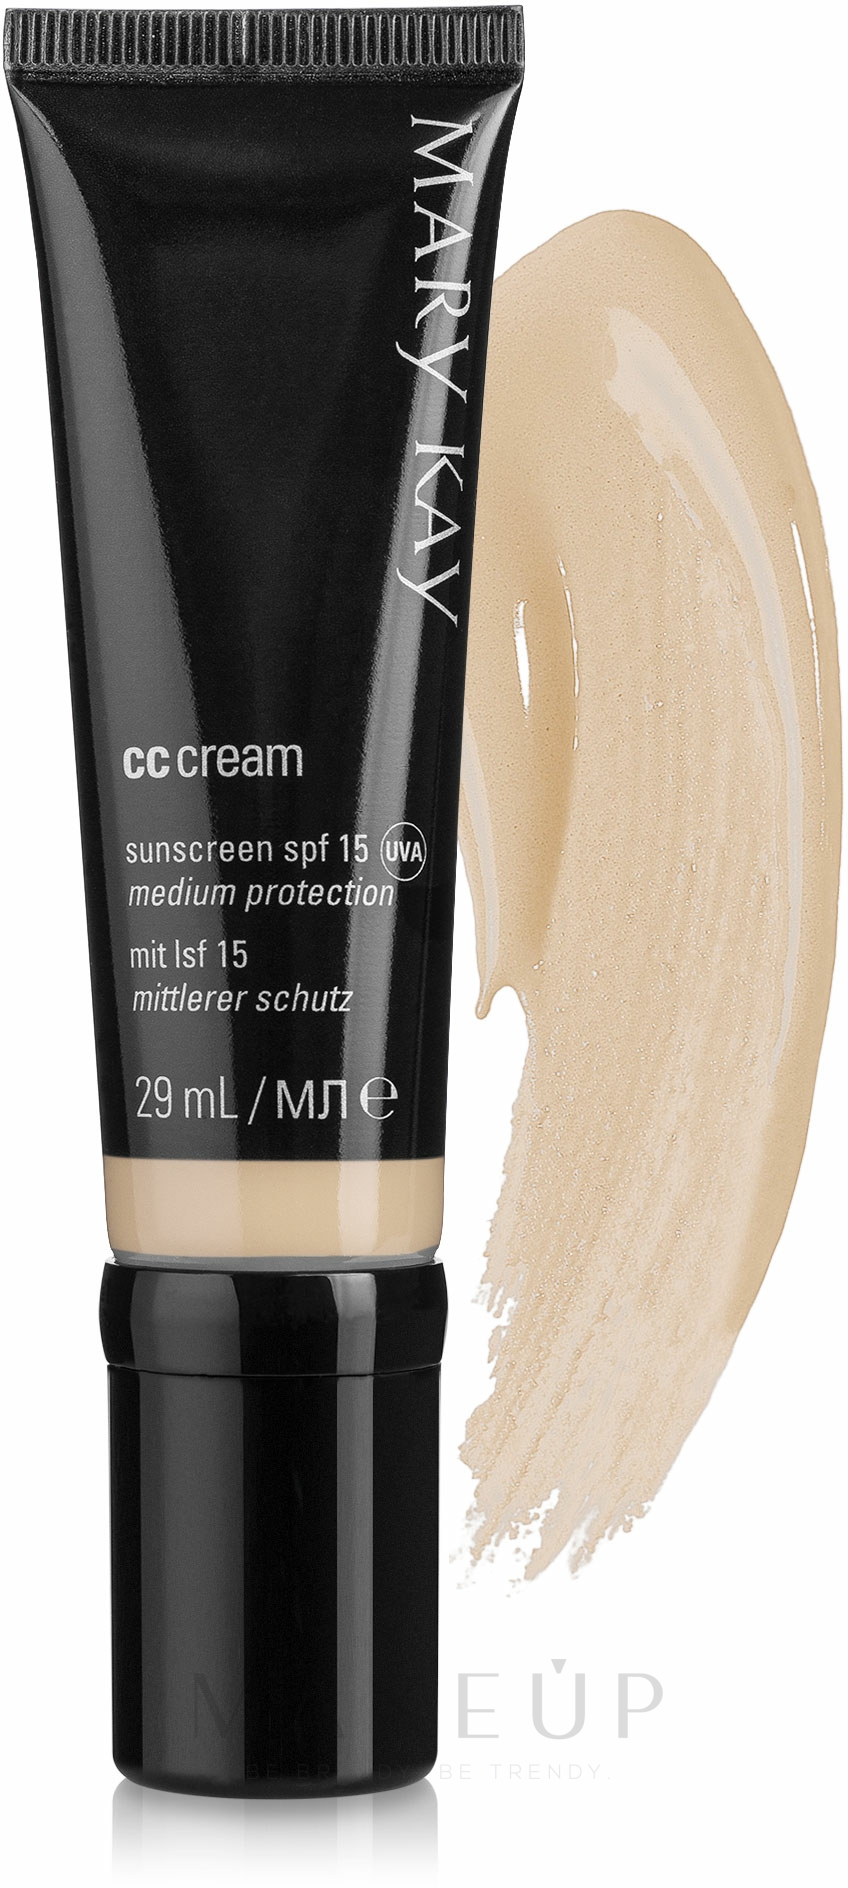 Multifunktionale CC Creme LSF 15 - Mary Kay CC Cream — Foto Hell